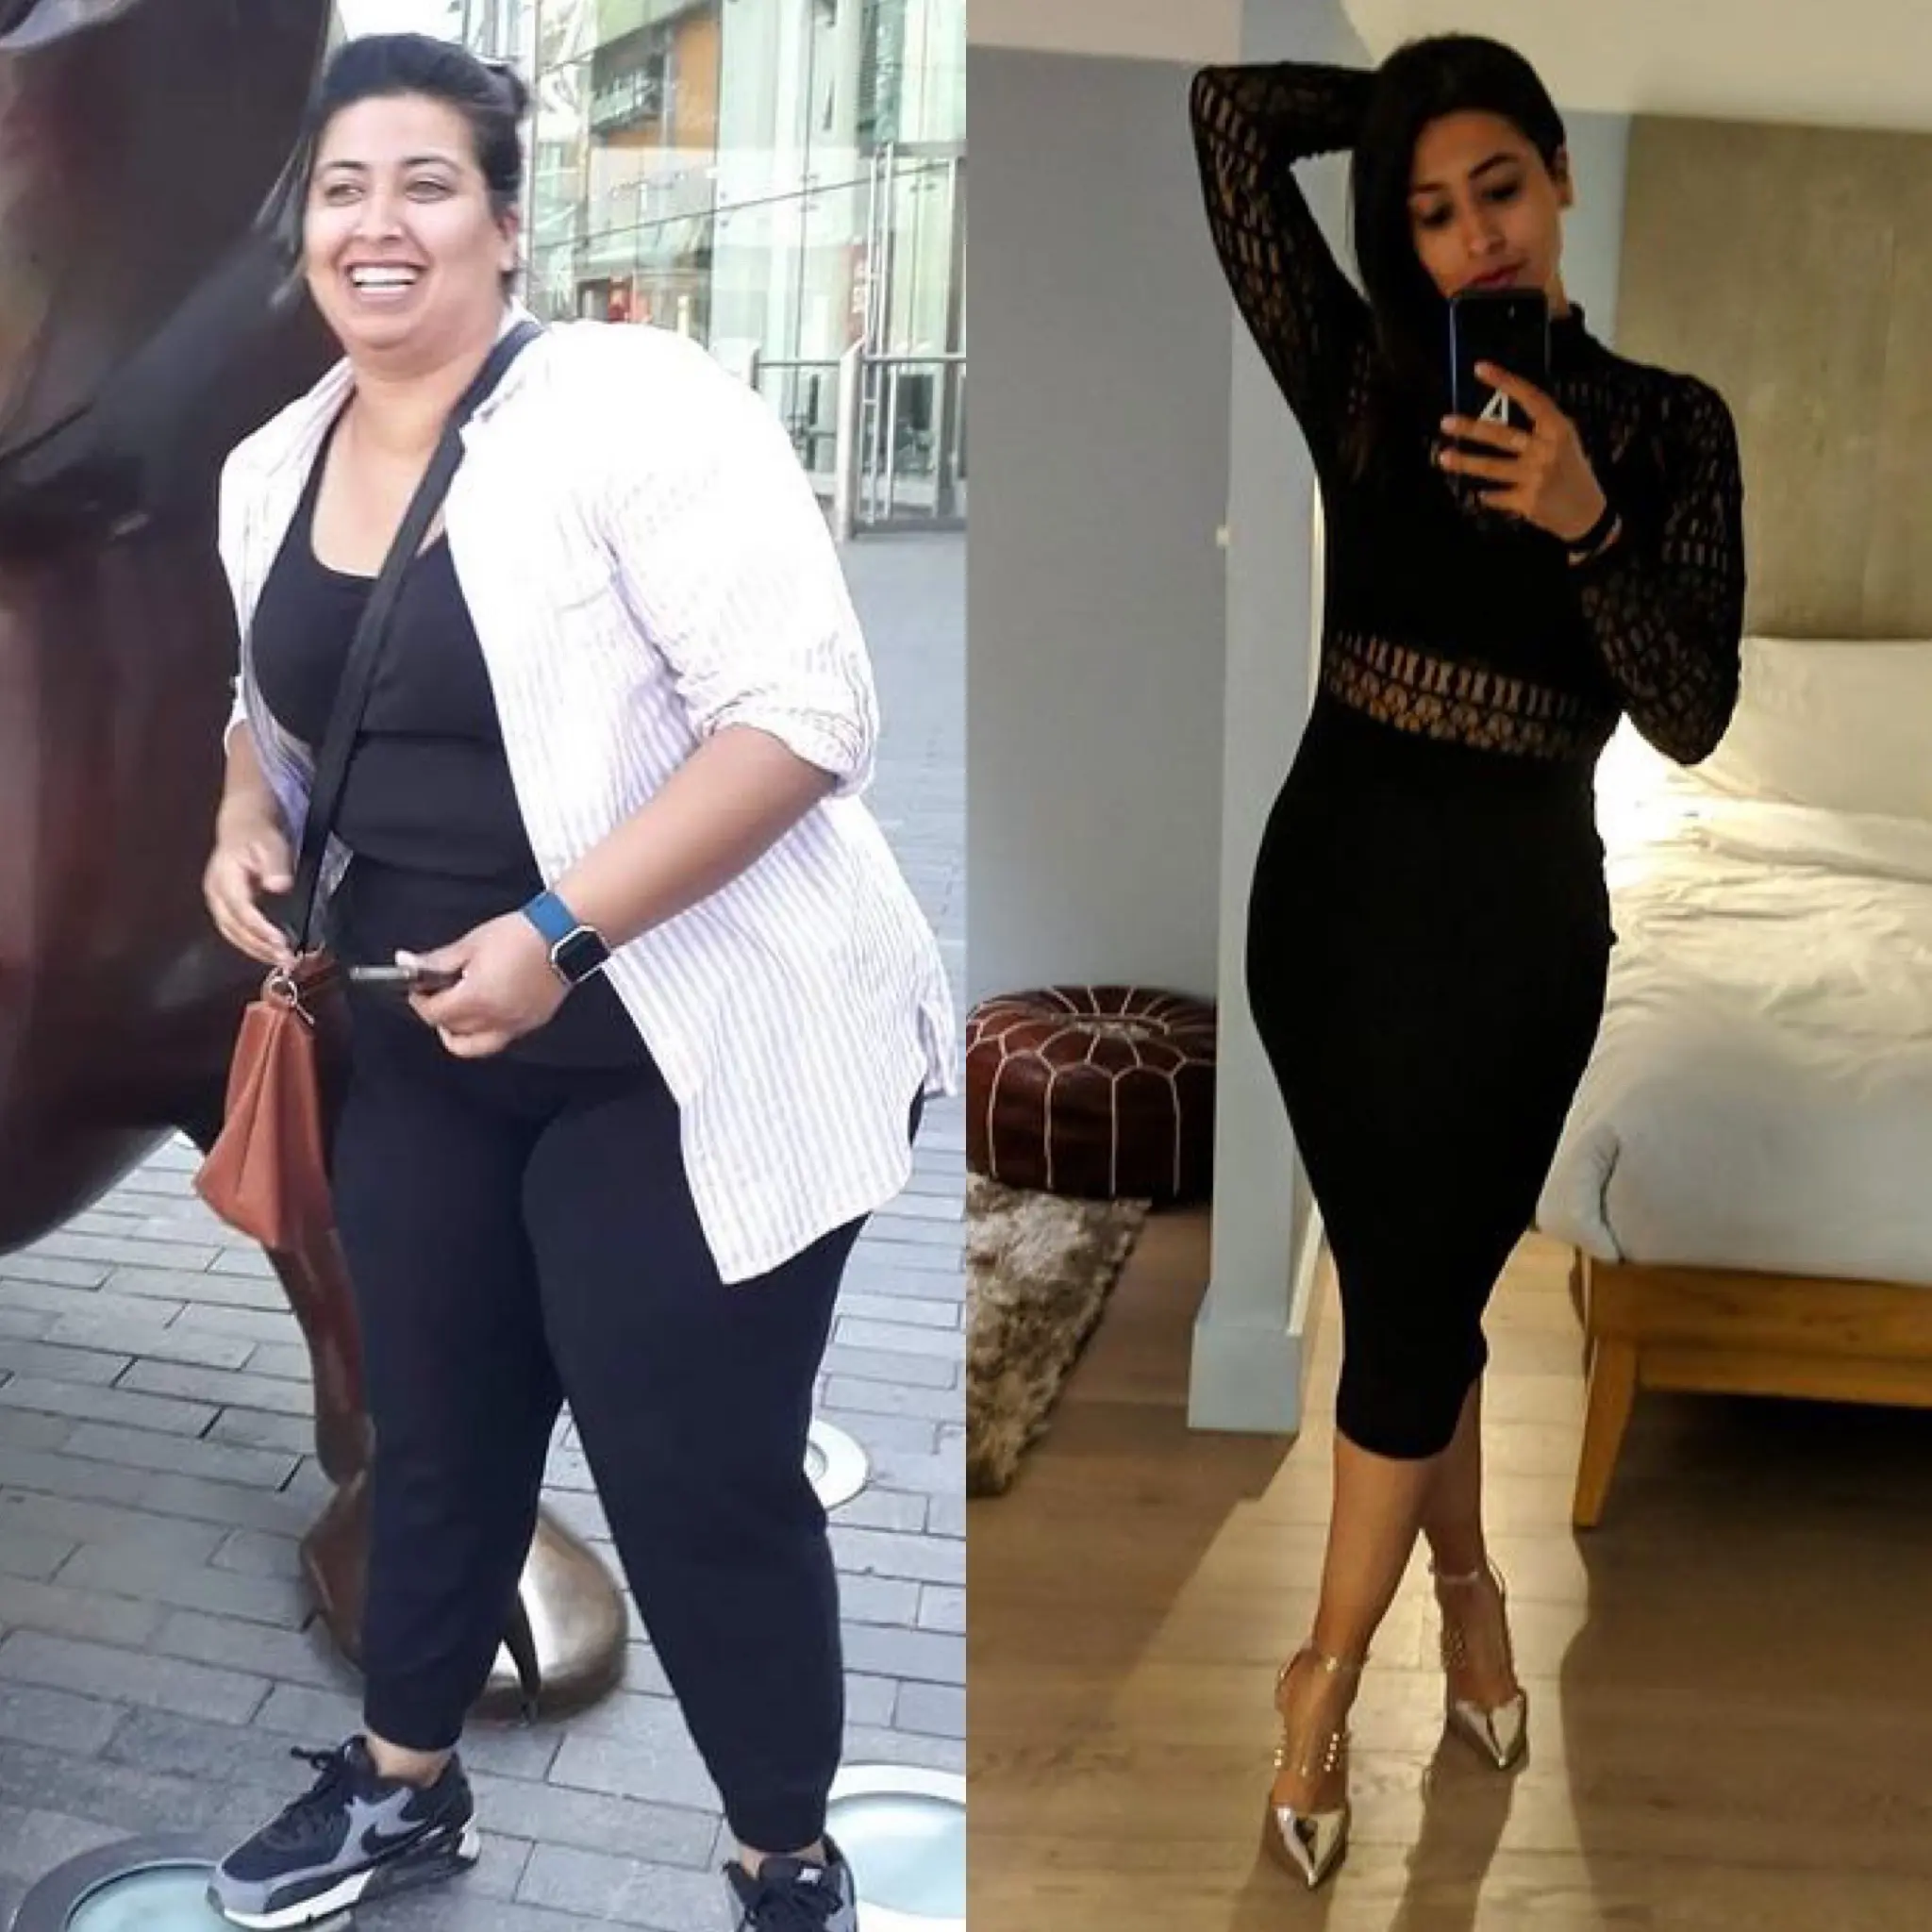 two images of Aishah, a girl who has lost 8 stone in weight. The image of the left is of Aishah before losing her weight, the image on the right is after. The images are used to show her extreme weight loss and her weight loss story that she discusses with Roberto on The Secret Of Weight Loss Podcast.